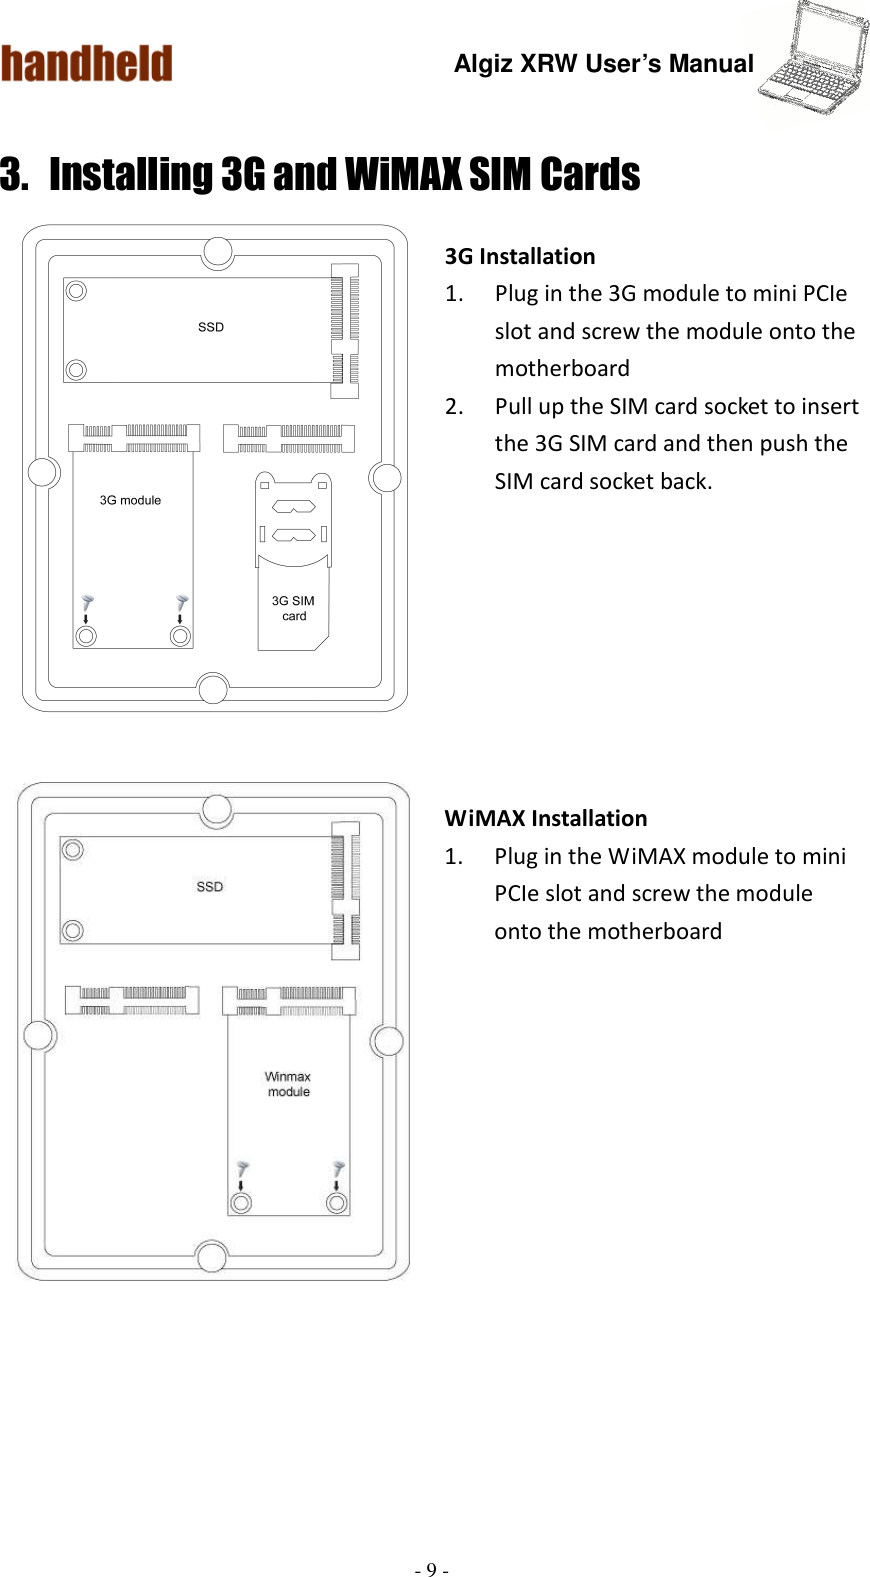 Algiz XRW User’s Manual  - 9 -  3. Installing 3G and WiMAX SIM Cards  3G Installation 1. Plug in the 3G module to mini PCIe slot and screw the module onto the motherboard     2. Pull up the SIM card socket to insert the 3G SIM card and then push the SIM card socket back.           WiMAX Installation 1. Plug in the WiMAX module to mini PCIe slot and screw the module onto the motherboard        